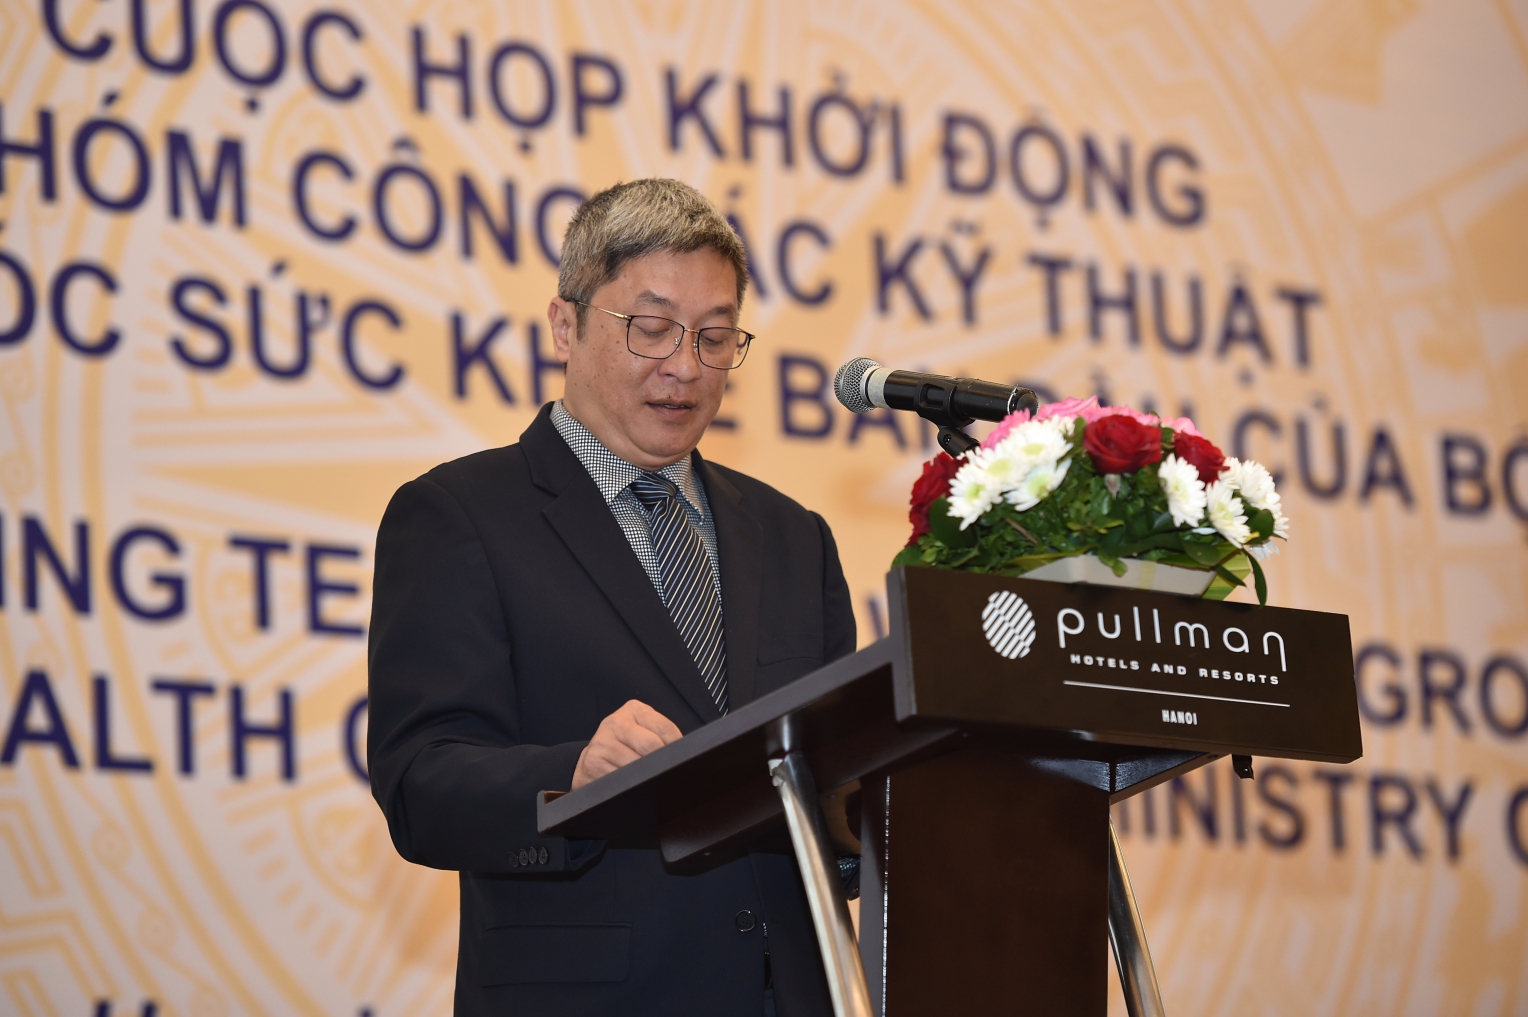 Deputy Minister, Mr, Nguyen Truong Son stated that the Working Group’s acivities will strengthen the health system and PHC in Vietnam.